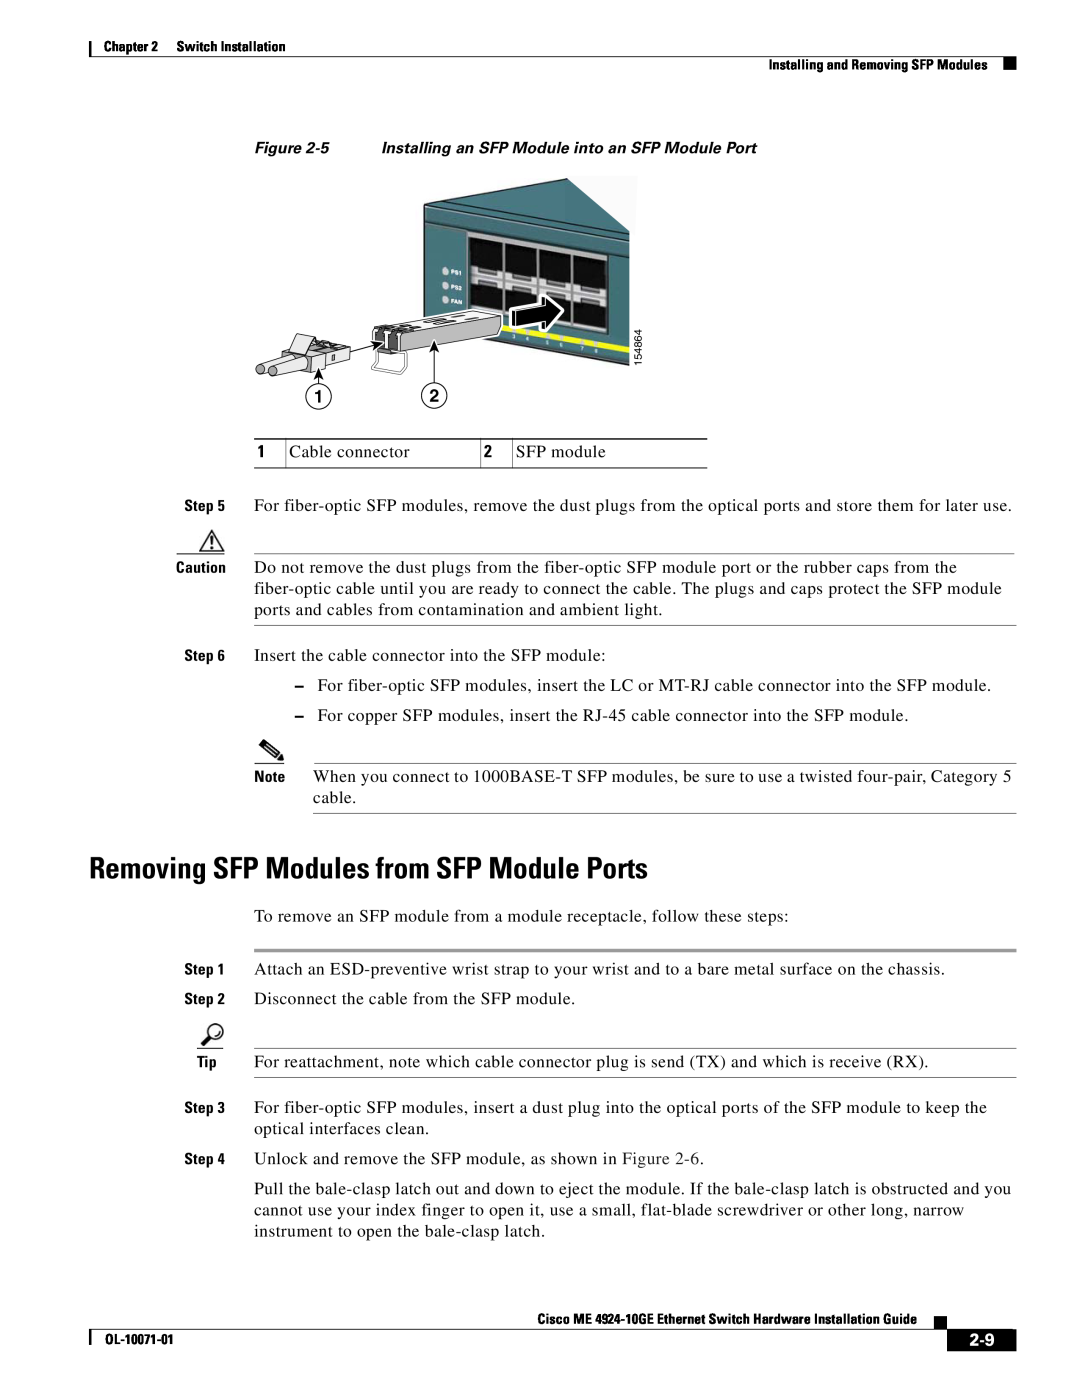 Cisco Systems ME 4924-10GE manual Removing SFP Modules from SFP Module Ports 